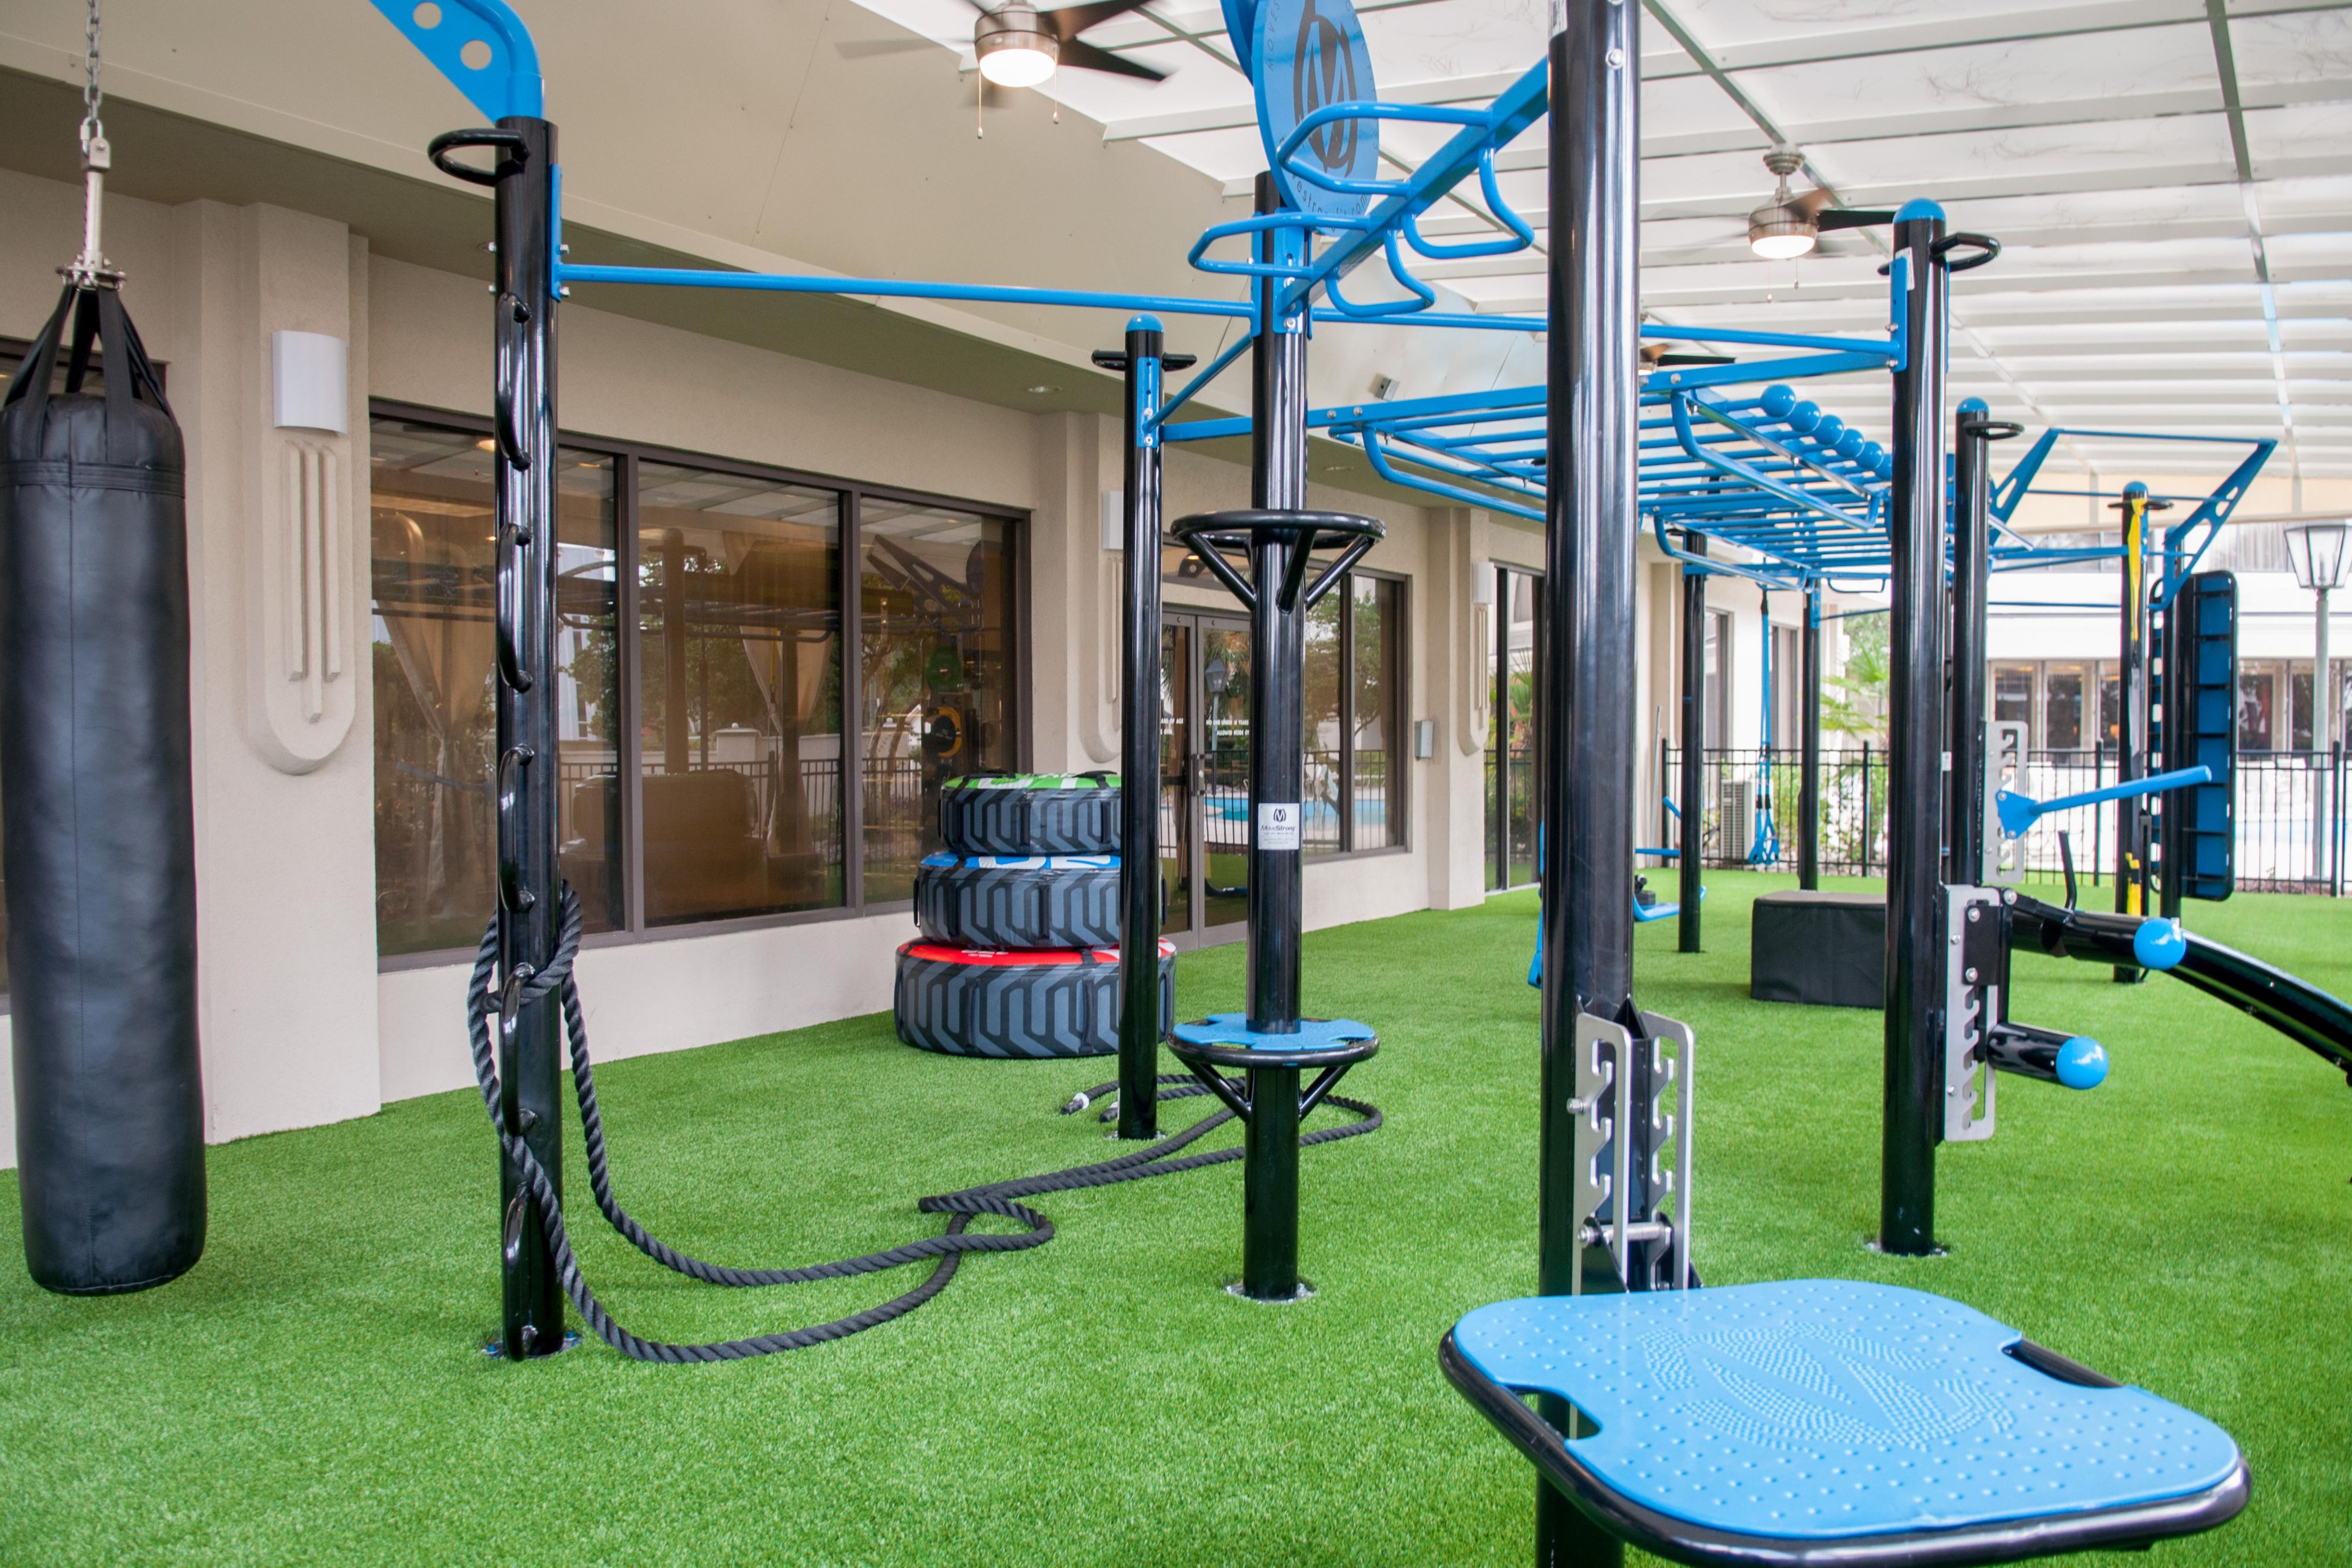 Get in a workout at our state-of-the-art outdoor fitness center.